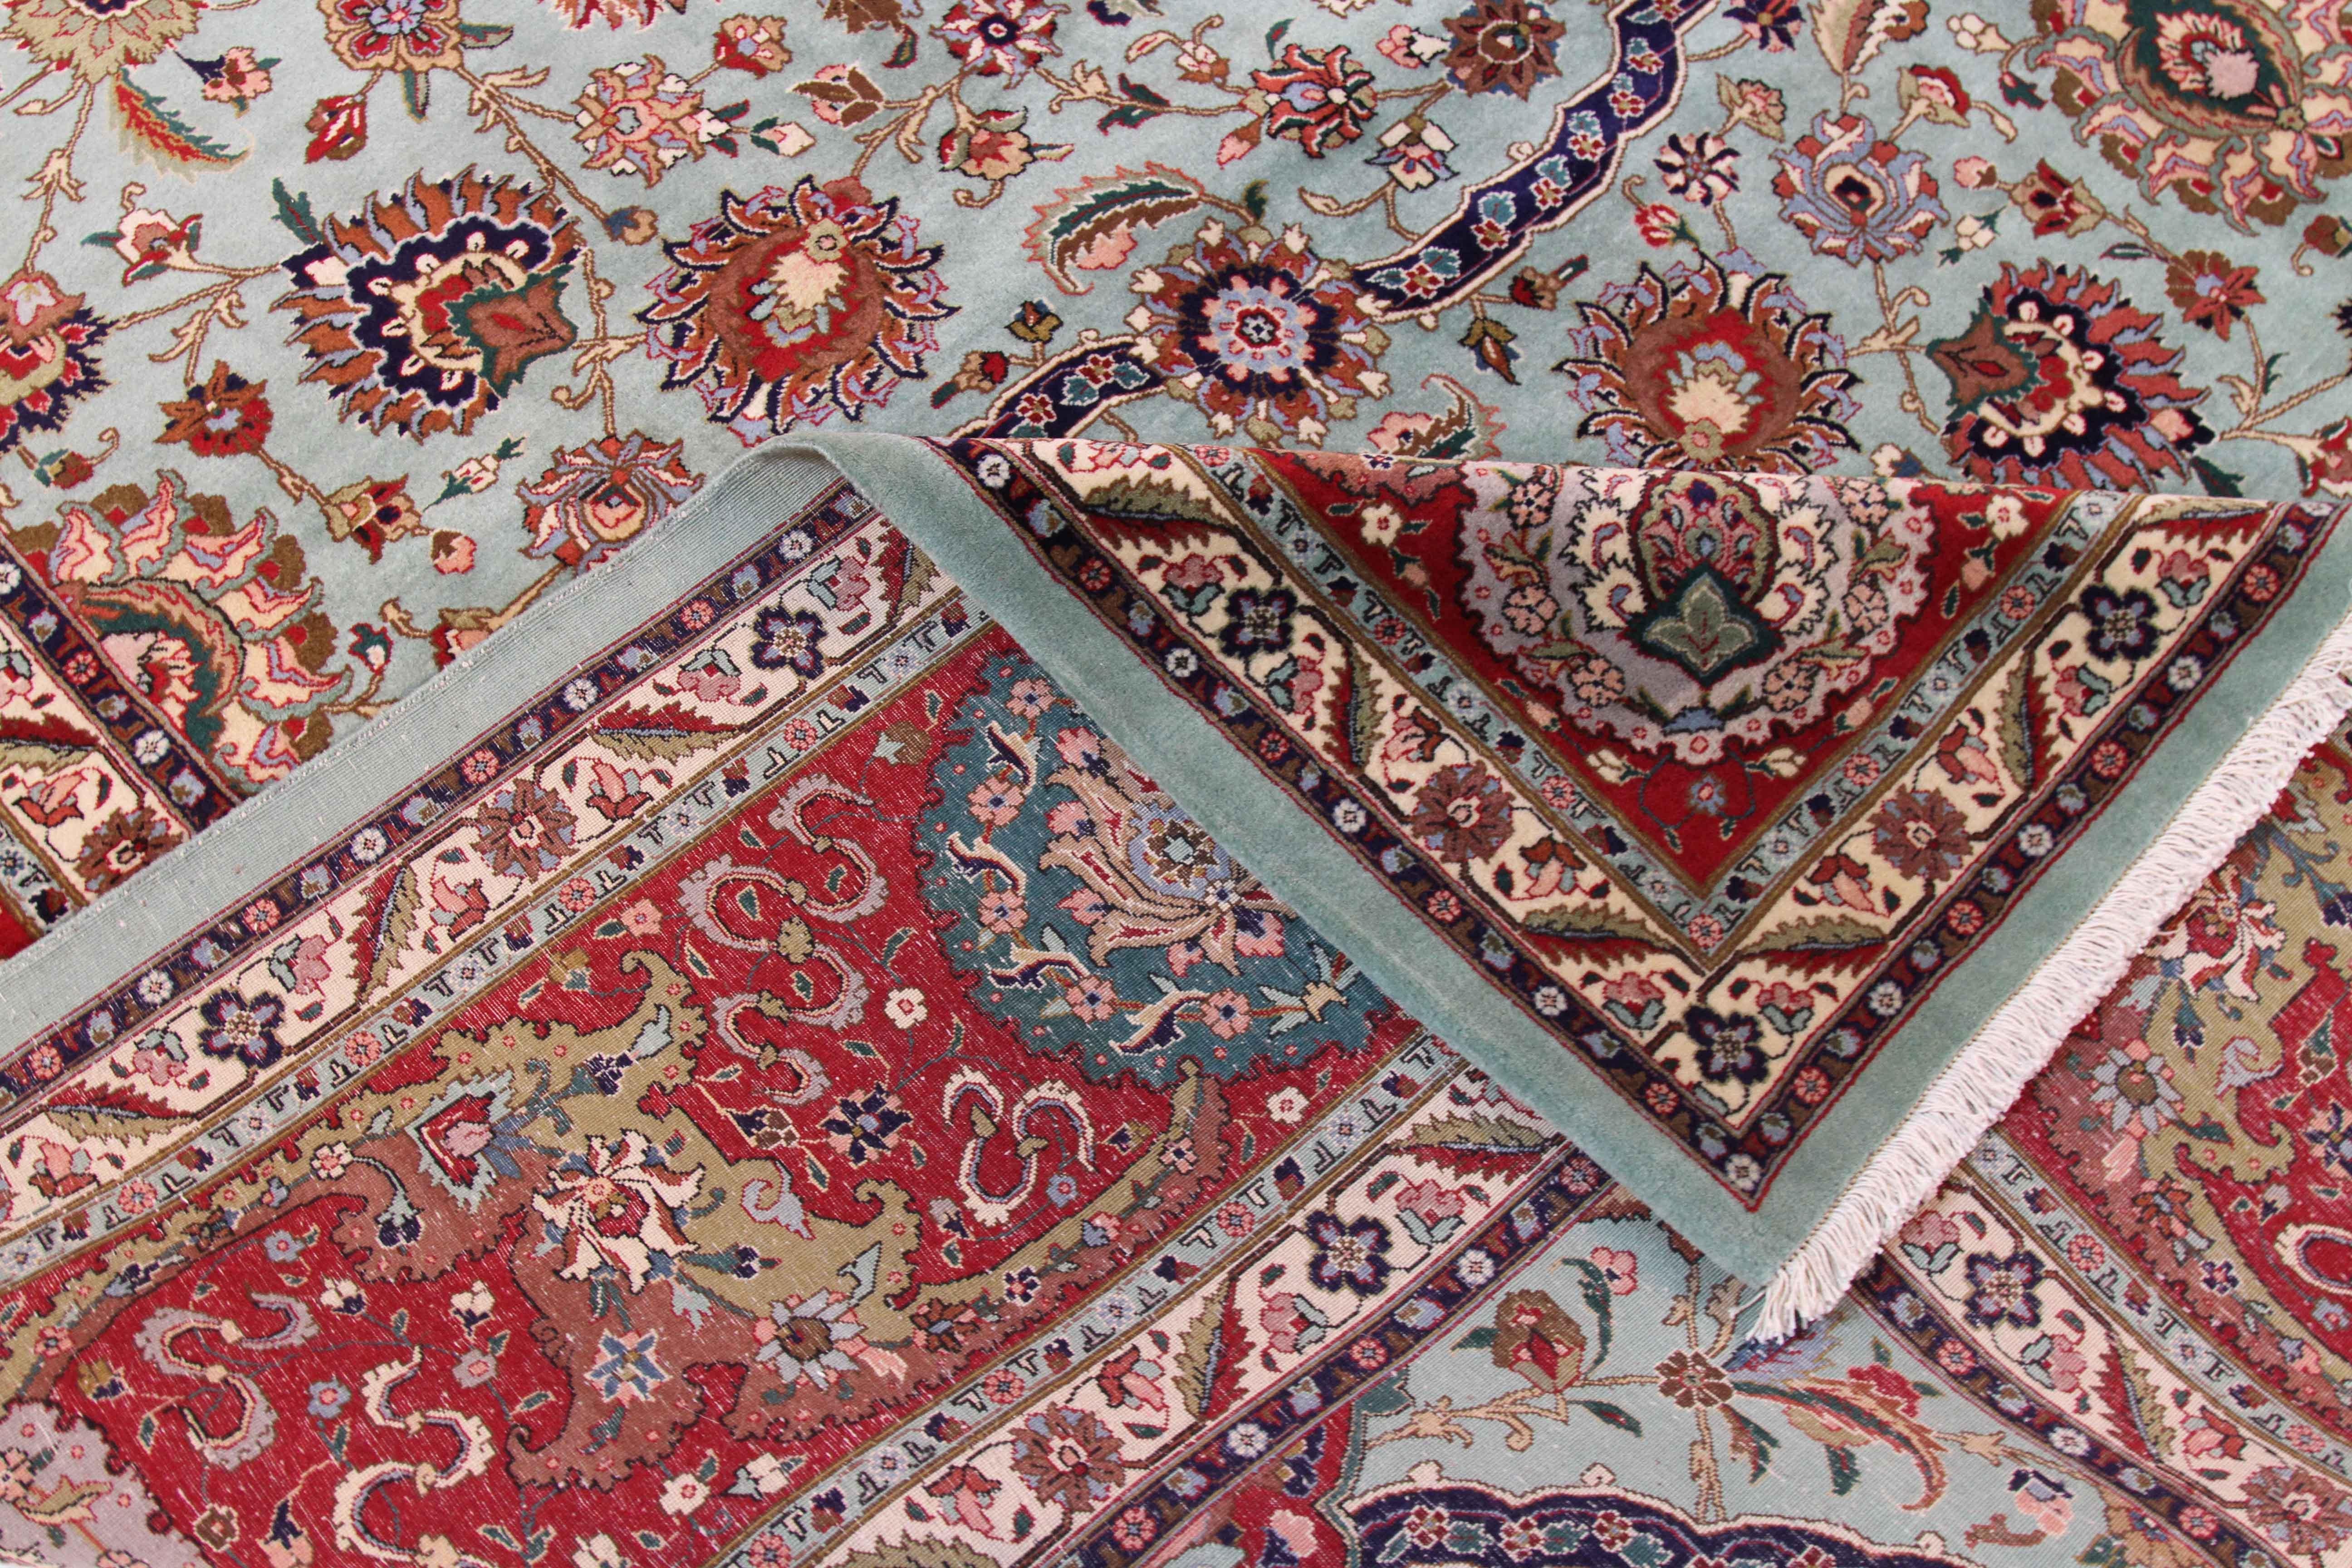 1970s antique Persian rug hand knotted from the finest wool and all-natural plant-based dyes. It features a majestic floral field design in blue and red with hints of navy and green. It’s border has beautiful alternating ‘Boteh’ figures that further